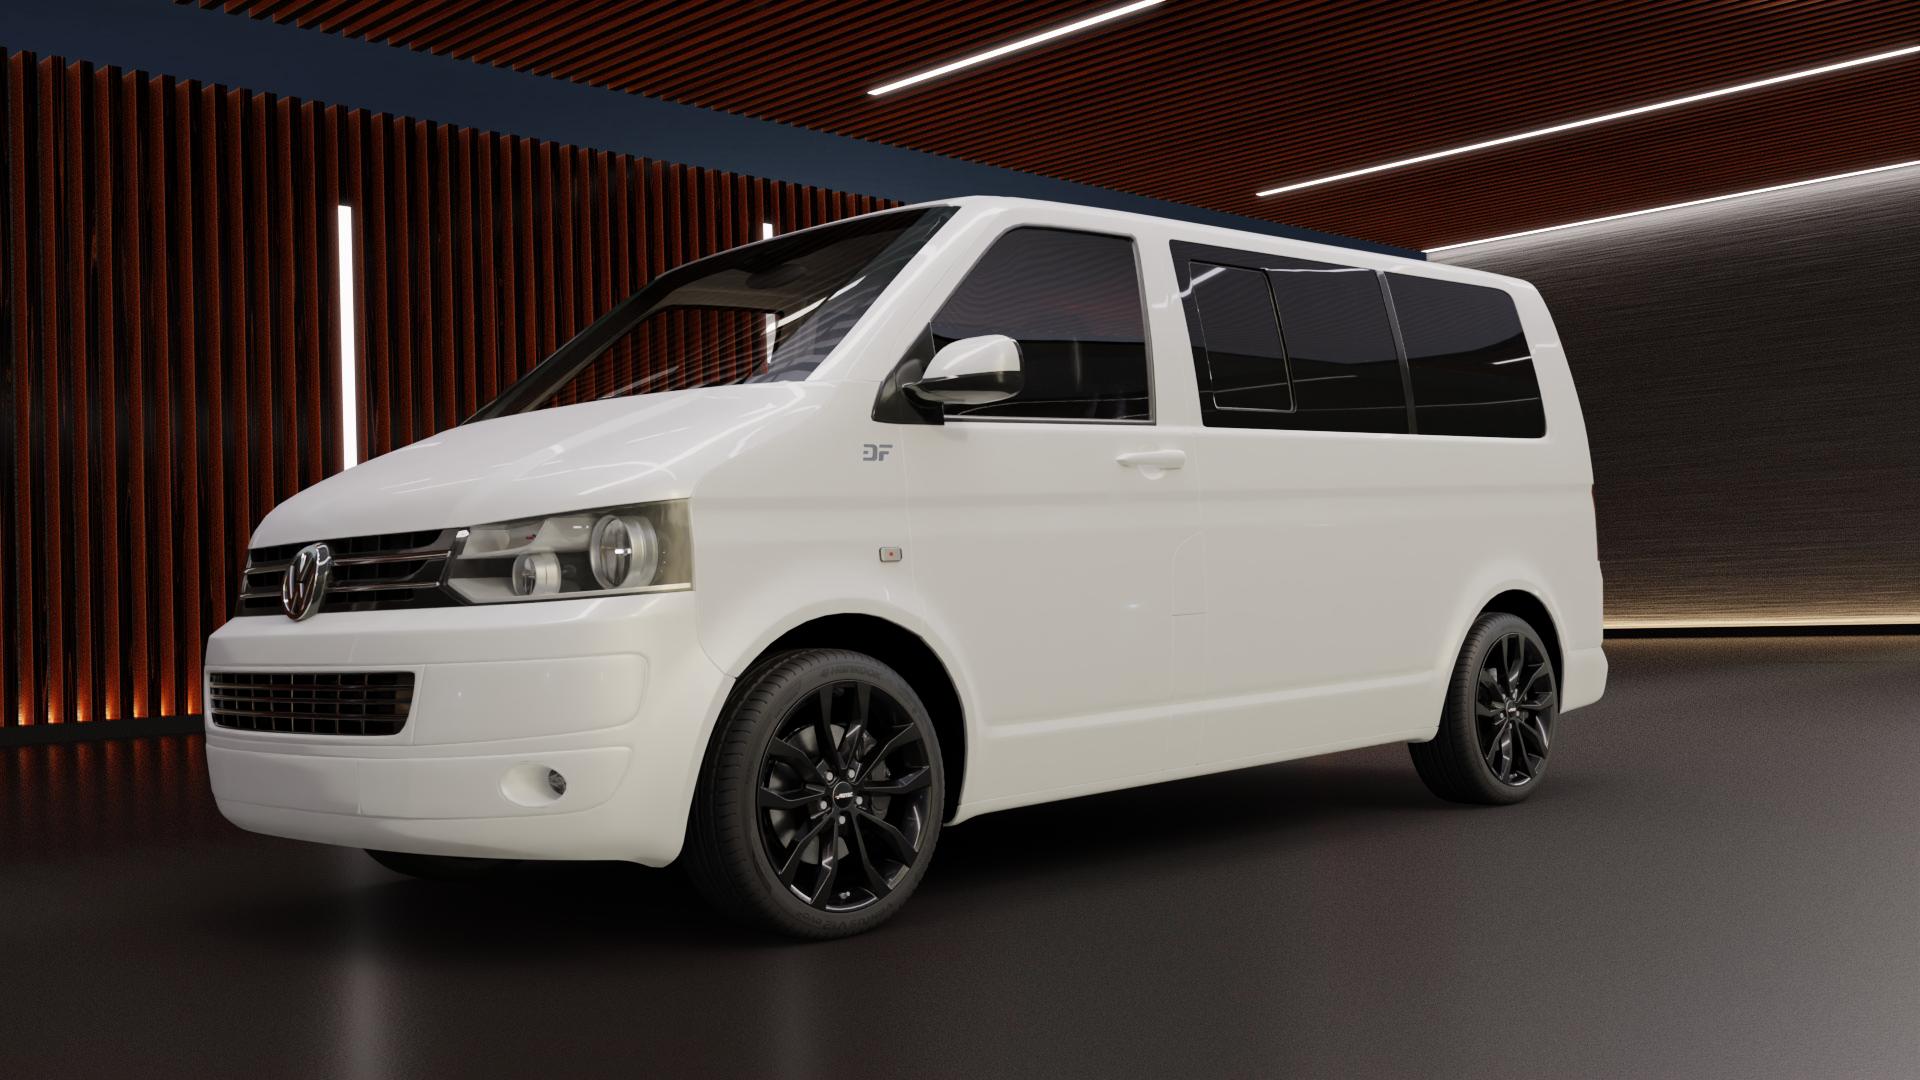 Volkswagen (VW) T5 Caravelle 2,0l TSI 110kW (150 hp) Wheels and Tyre  Packages | velonity.com